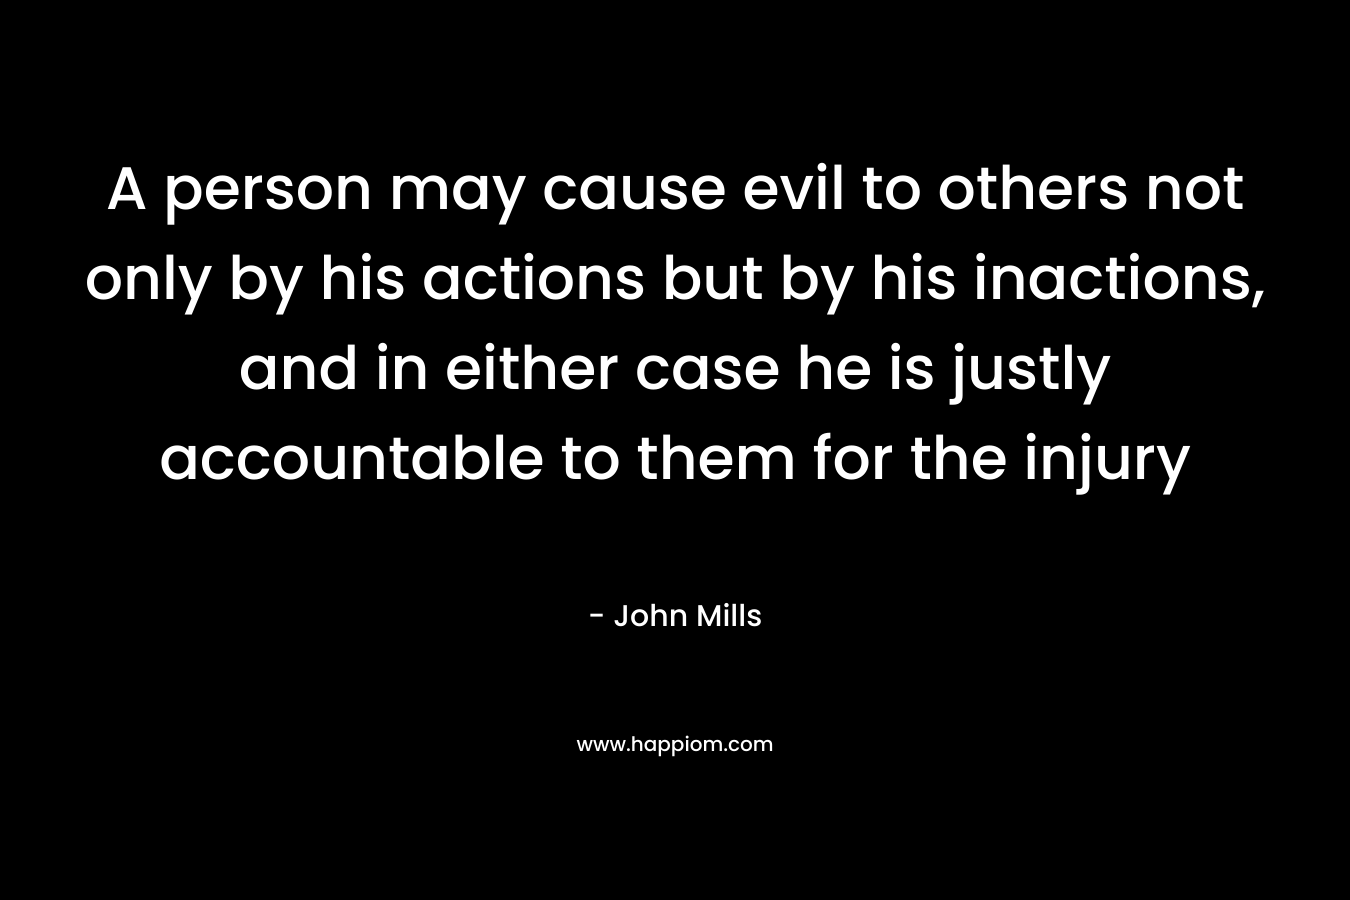 A person may cause evil to others not only by his actions but by his inactions, and in either case he is justly accountable to them for the injury – John Mills